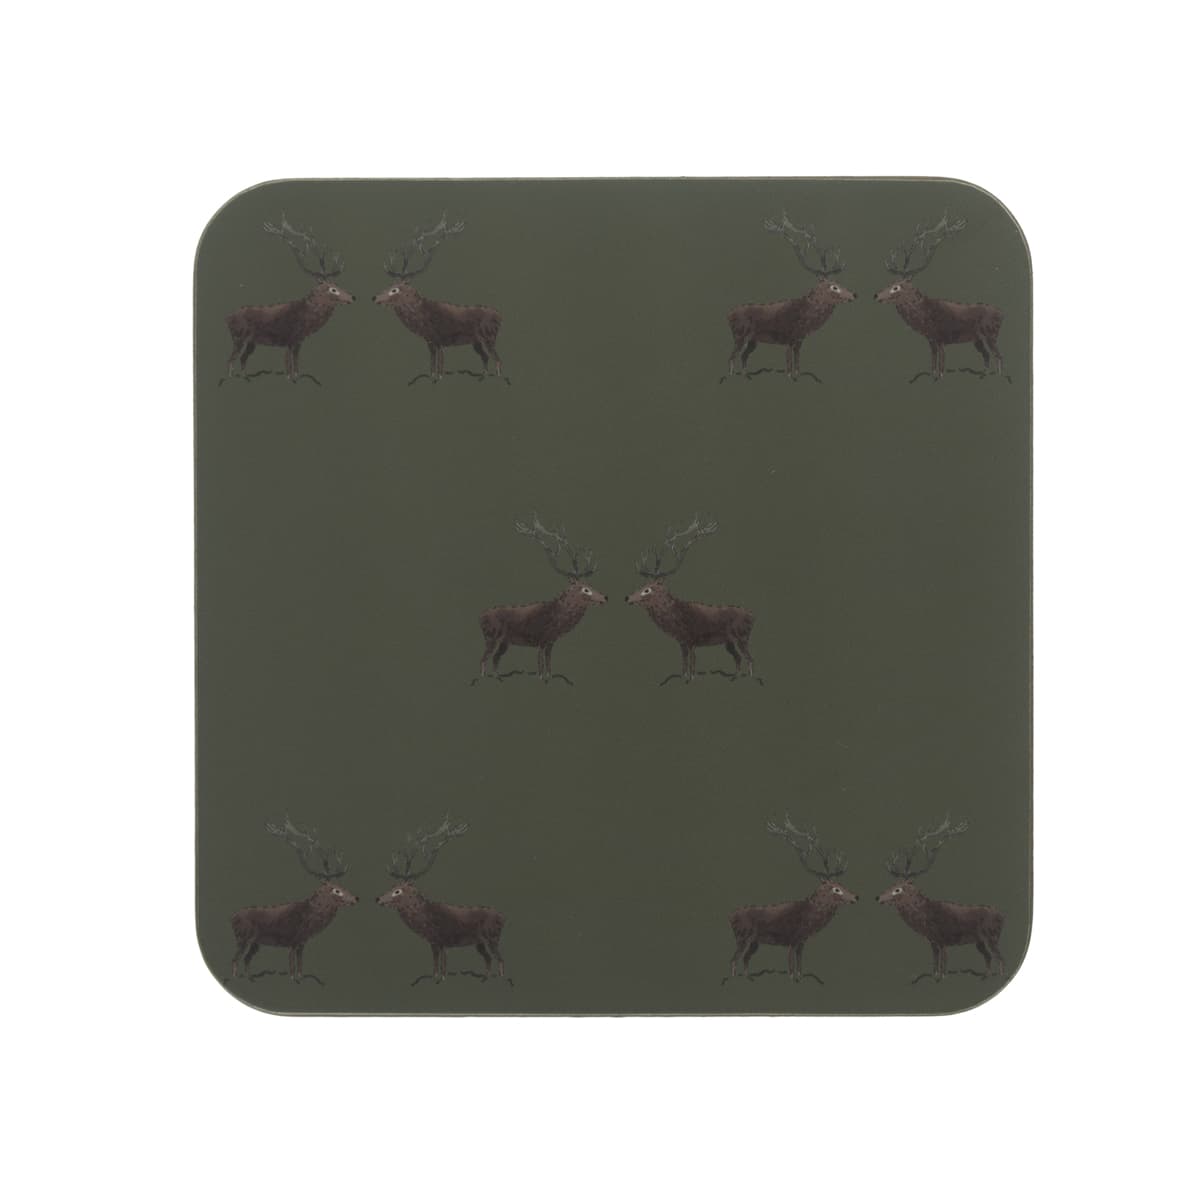 Highland Stag Coasters (Set of 4)